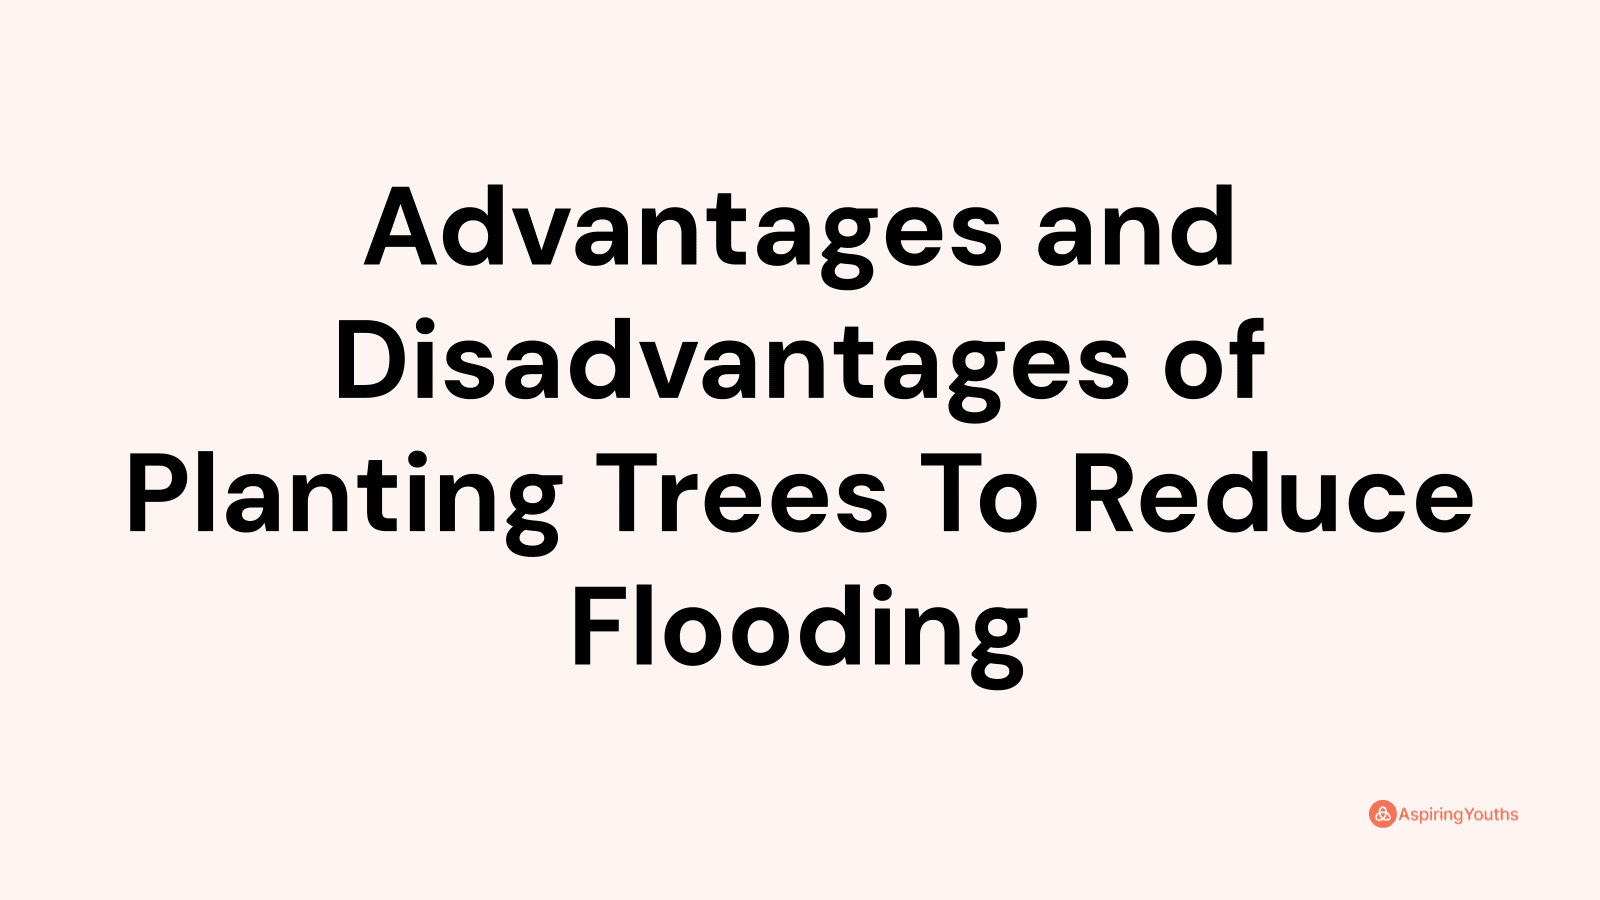 Advantages and disadvantages of Planting Trees To Reduce Flooding